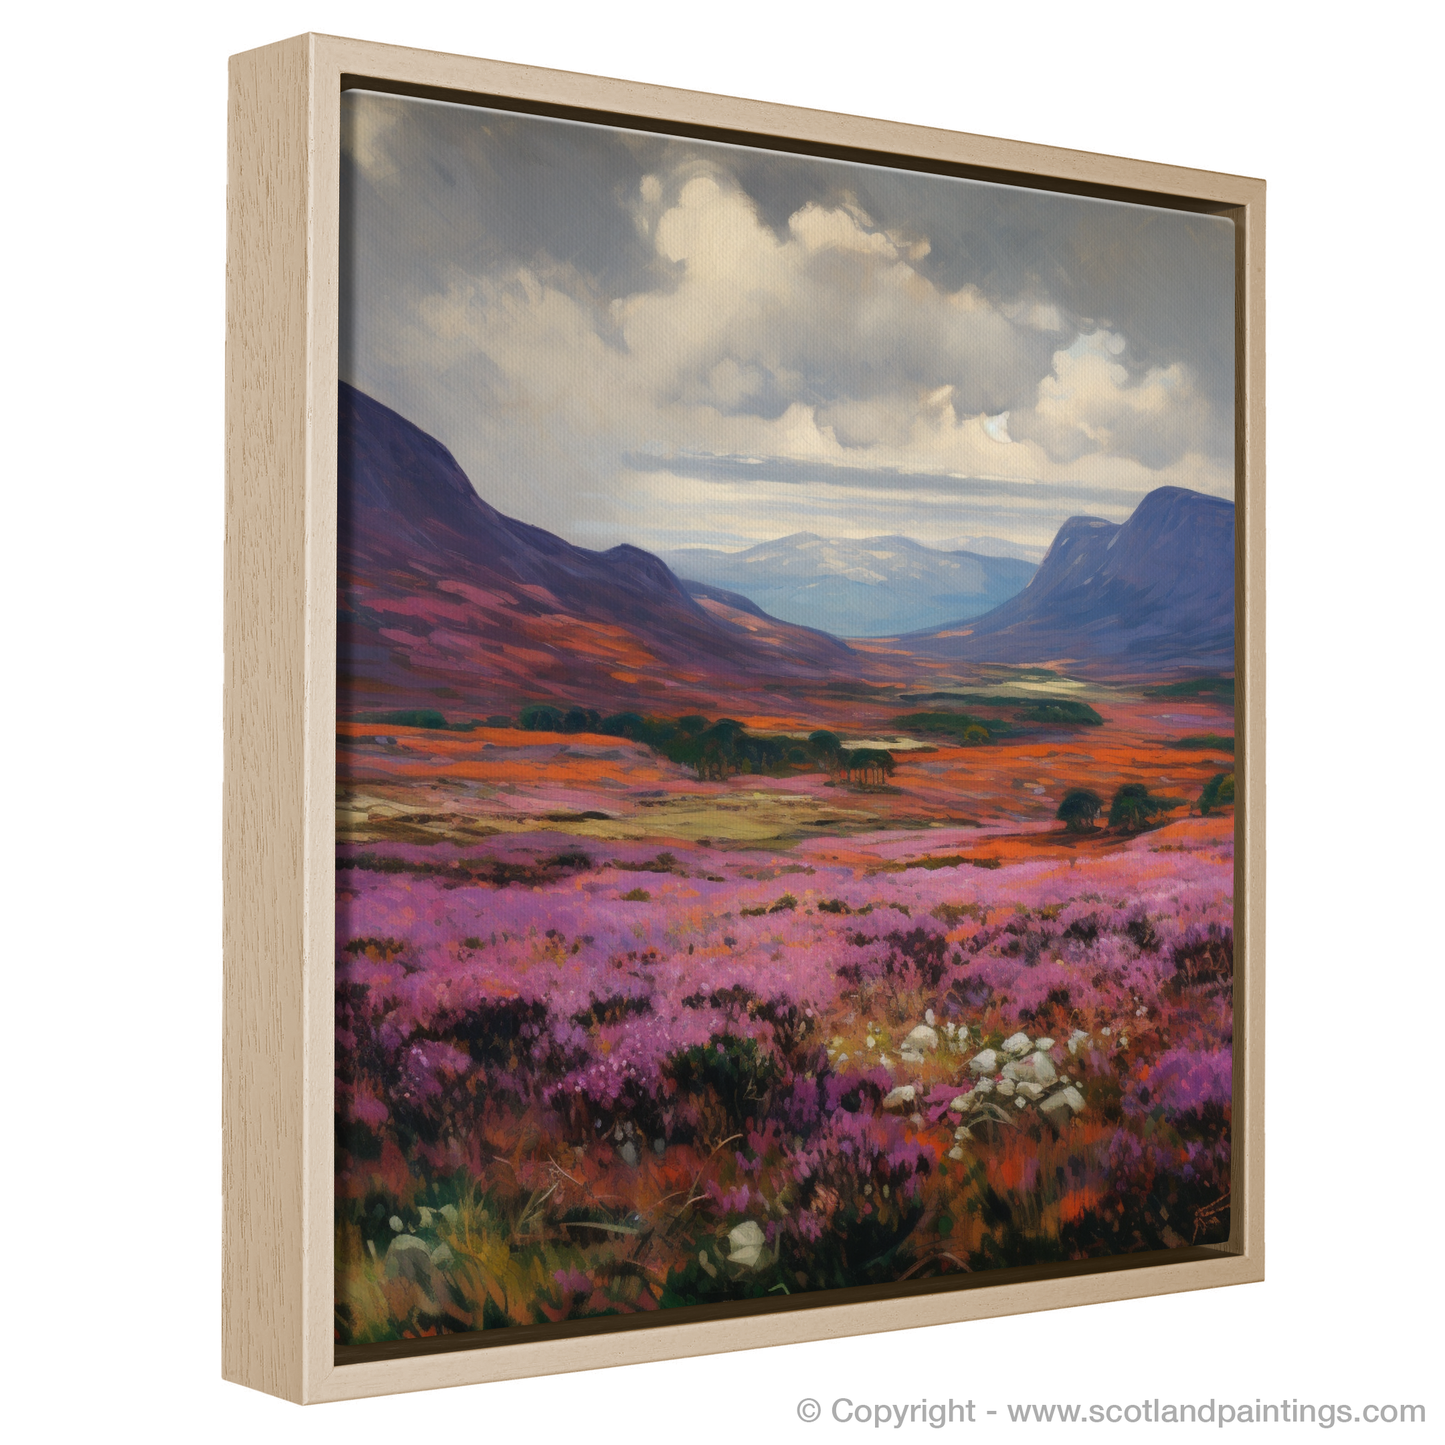 Heather on the Moorlands: An Art Nouveau Tribute to Braemar's Wild Beauty